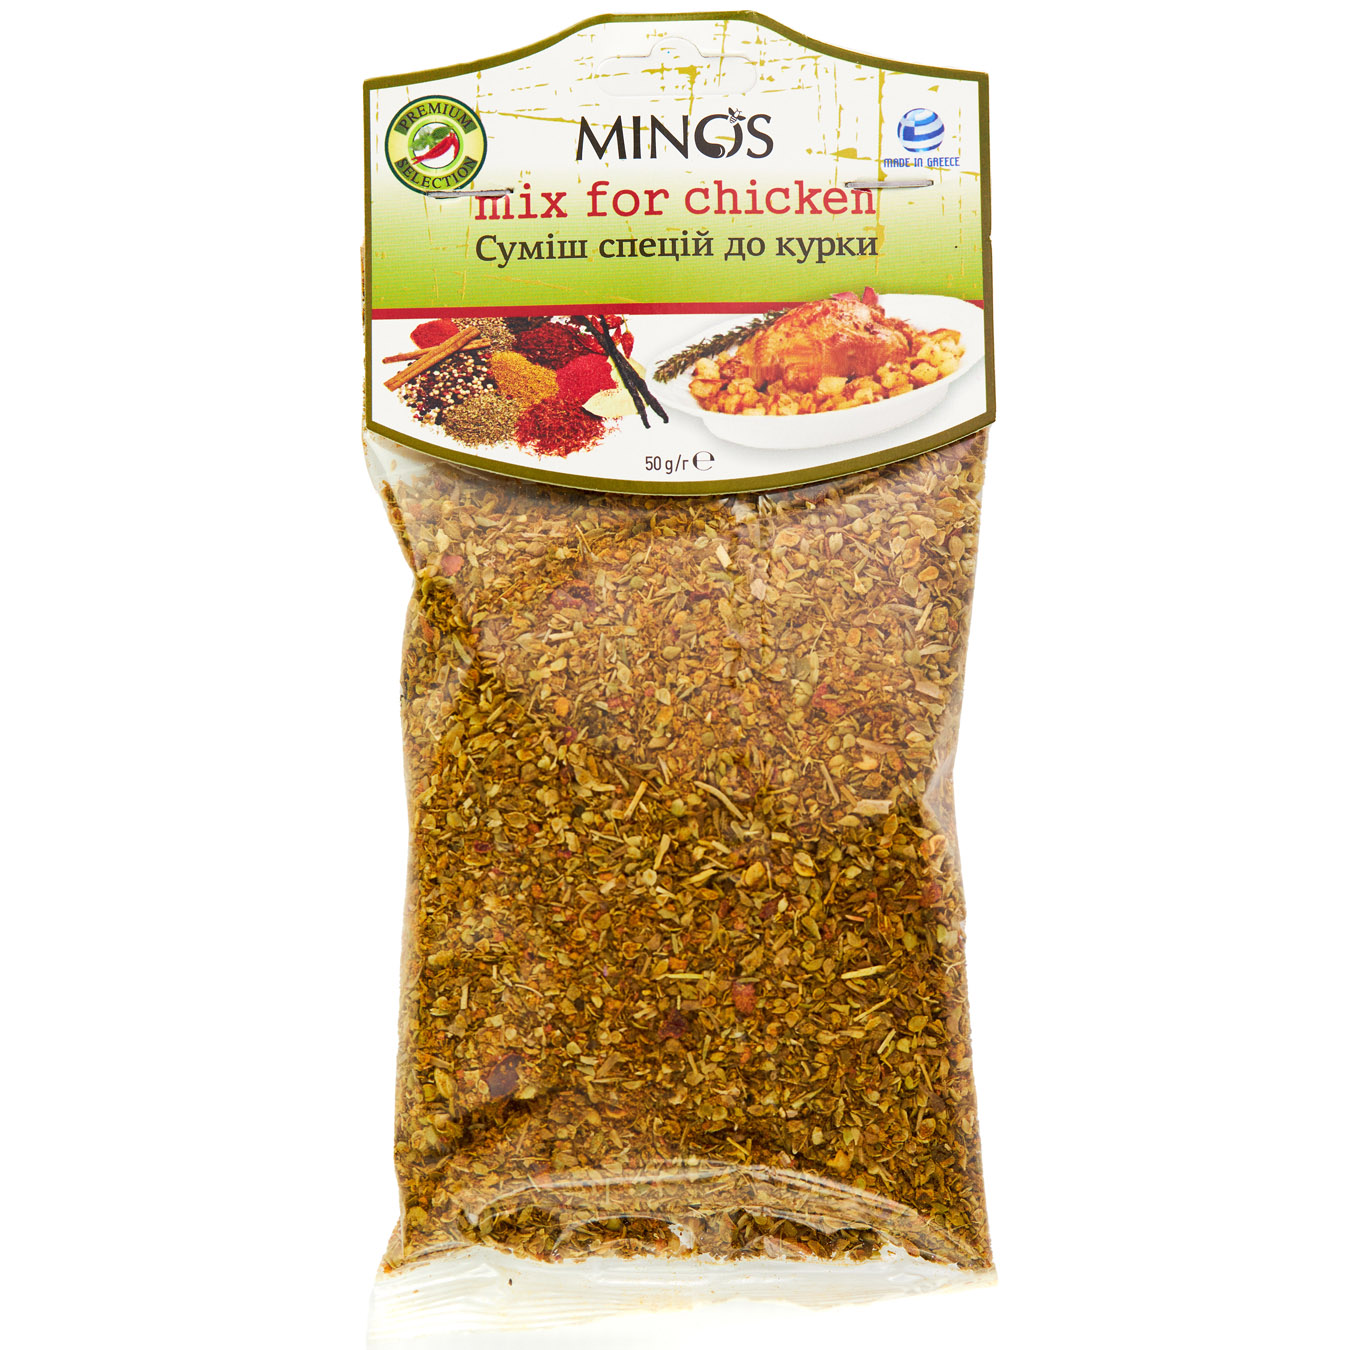 Minos Spices Mix for Chicken 50g